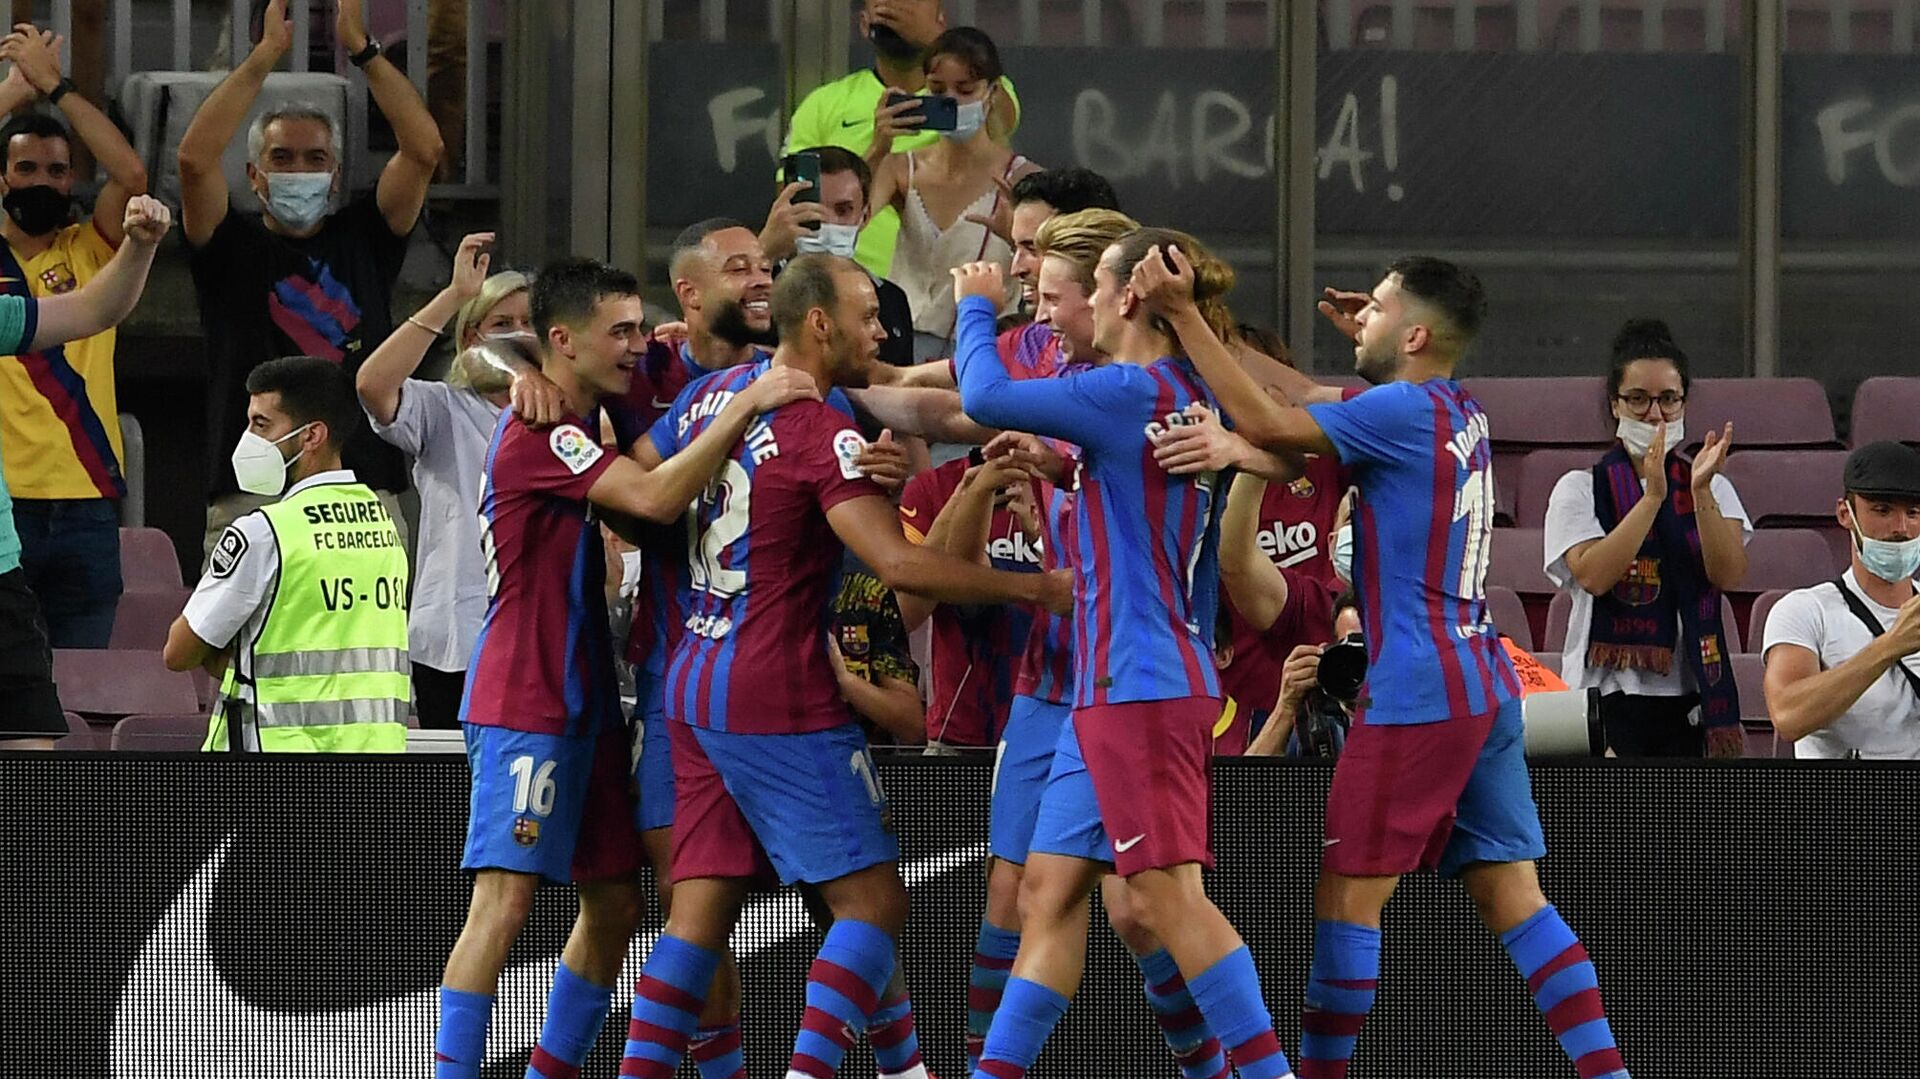 Barcelona's Danish forward Martin Braithwaite (3L) celebrates with teammates after scoring during the Spanish League football match between Barcelona and Real Sociedad at the Camp Nou stadium in Barcelona on August 15, 2021. (Photo by Josep LAGO / AFP) - РИА Новости, 1920, 15.08.2021